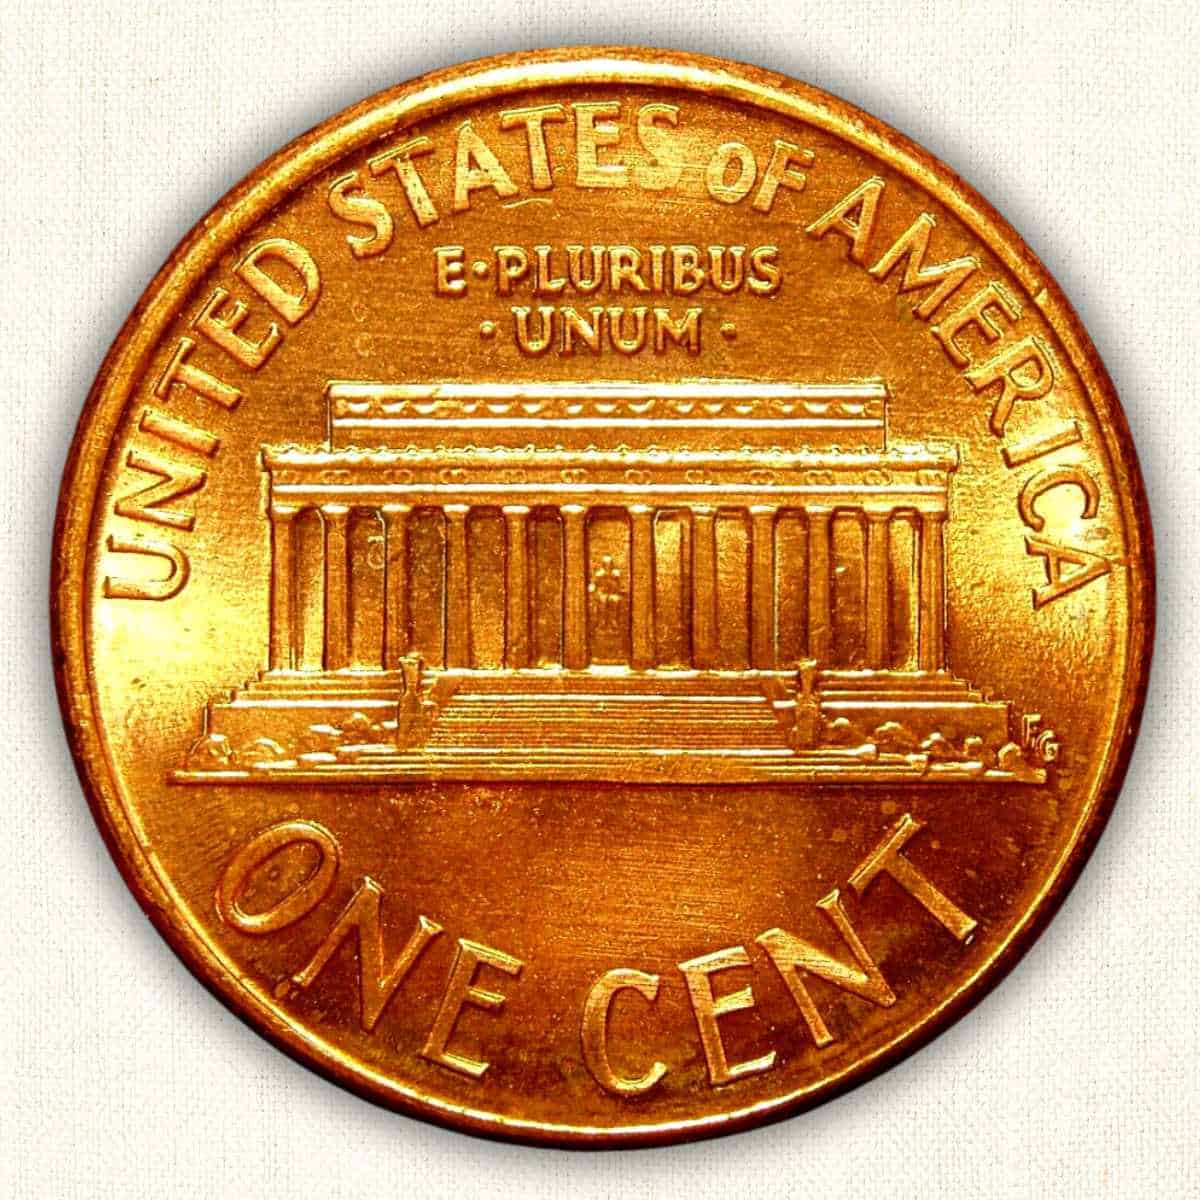 1989 Penny Reverse features